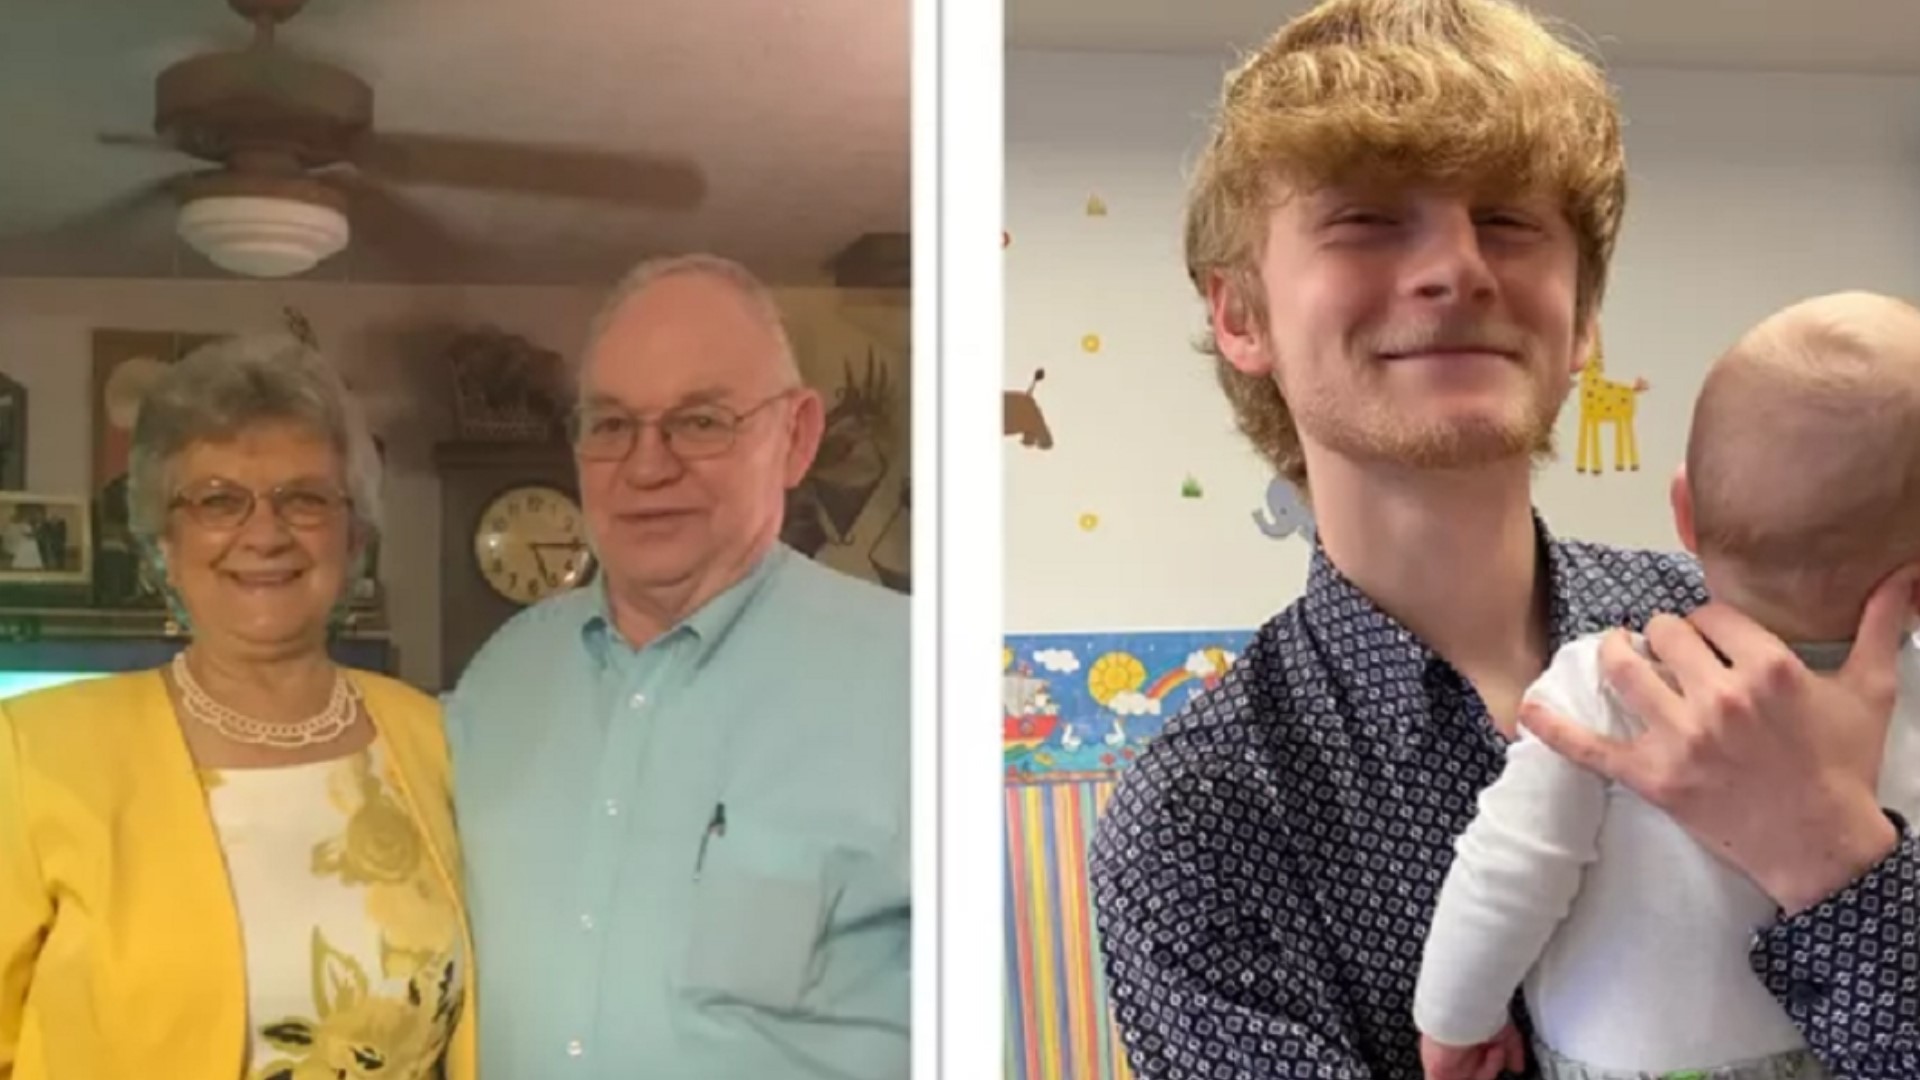 The Hawk family has posted a GoFundMe page to pay for the funerals of Tommy and Evelyn Hawk, along with their 19-year-old grandson Luke.